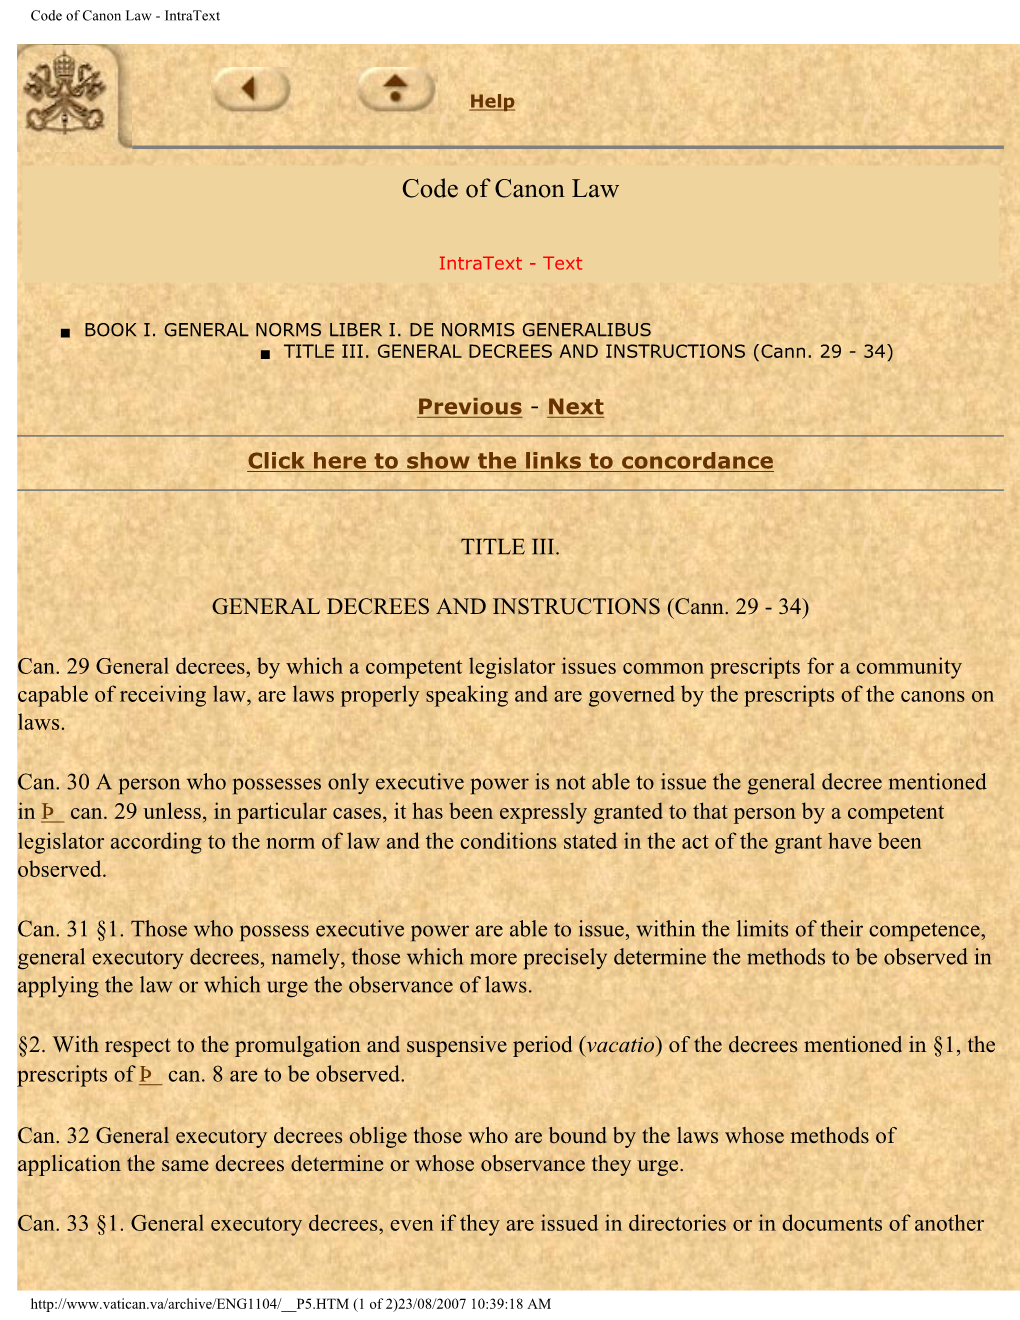 Code of Canon Law - Intratext